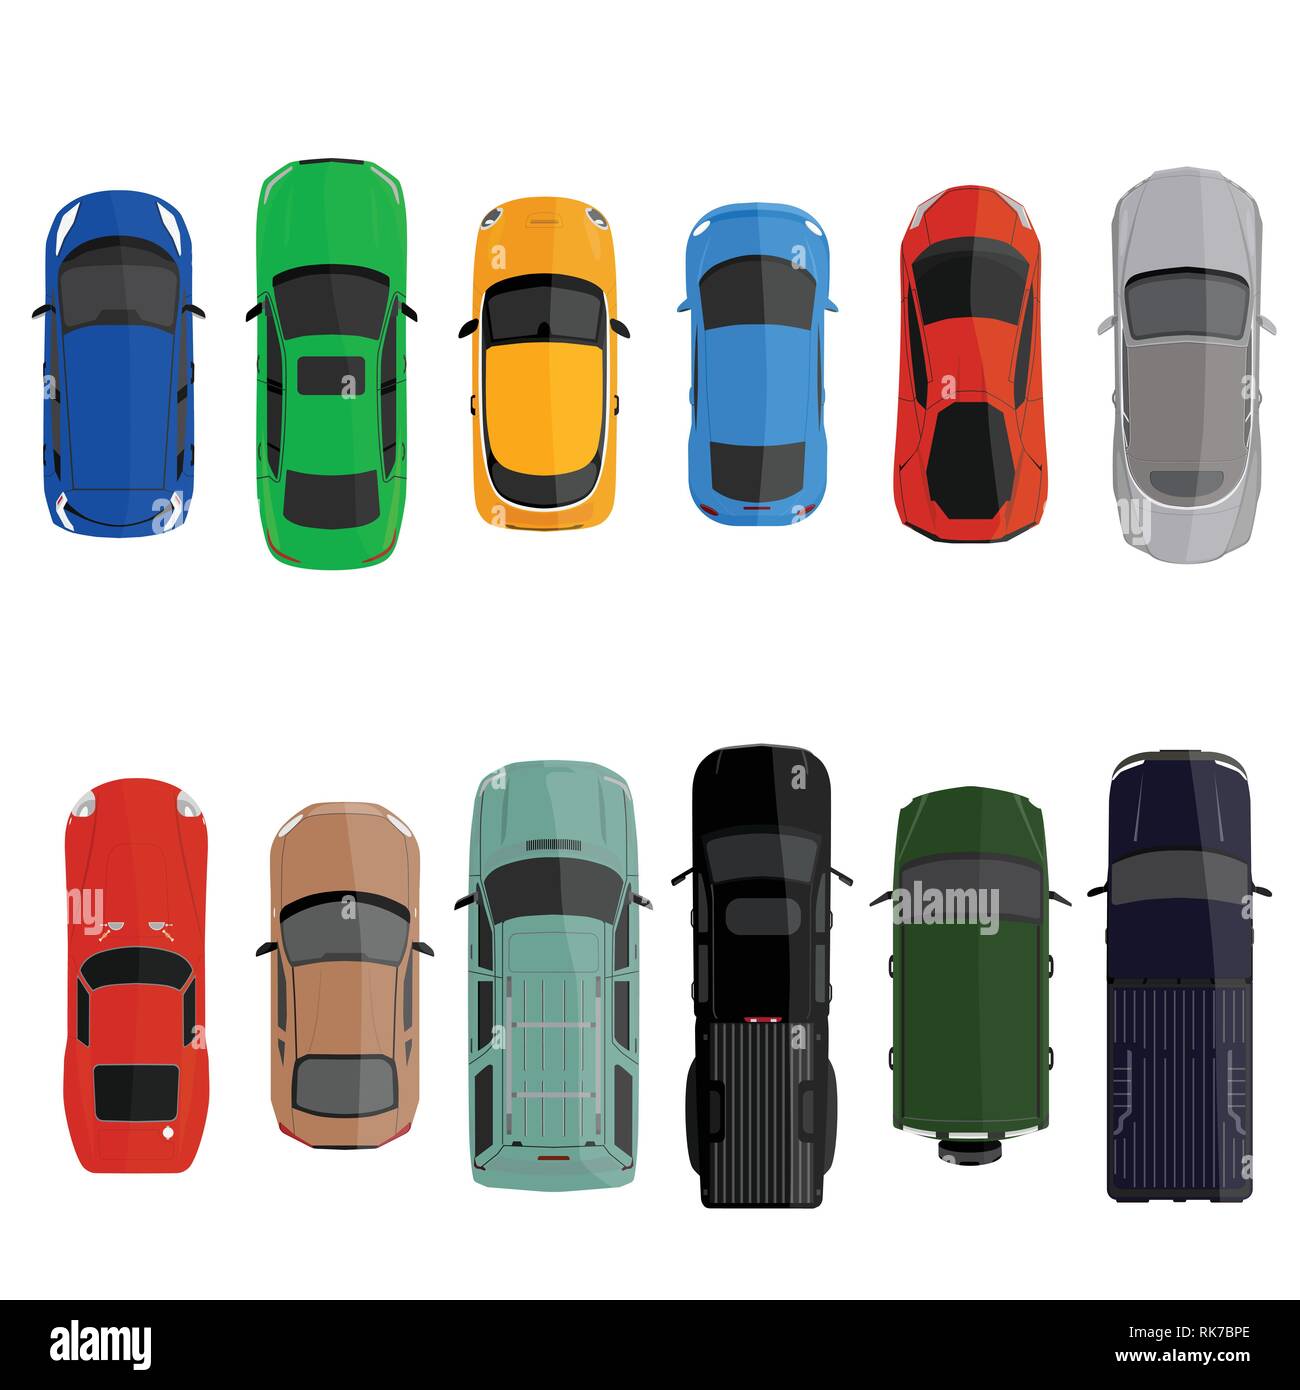 [View 35+] View Car Icon Top View Background jpg